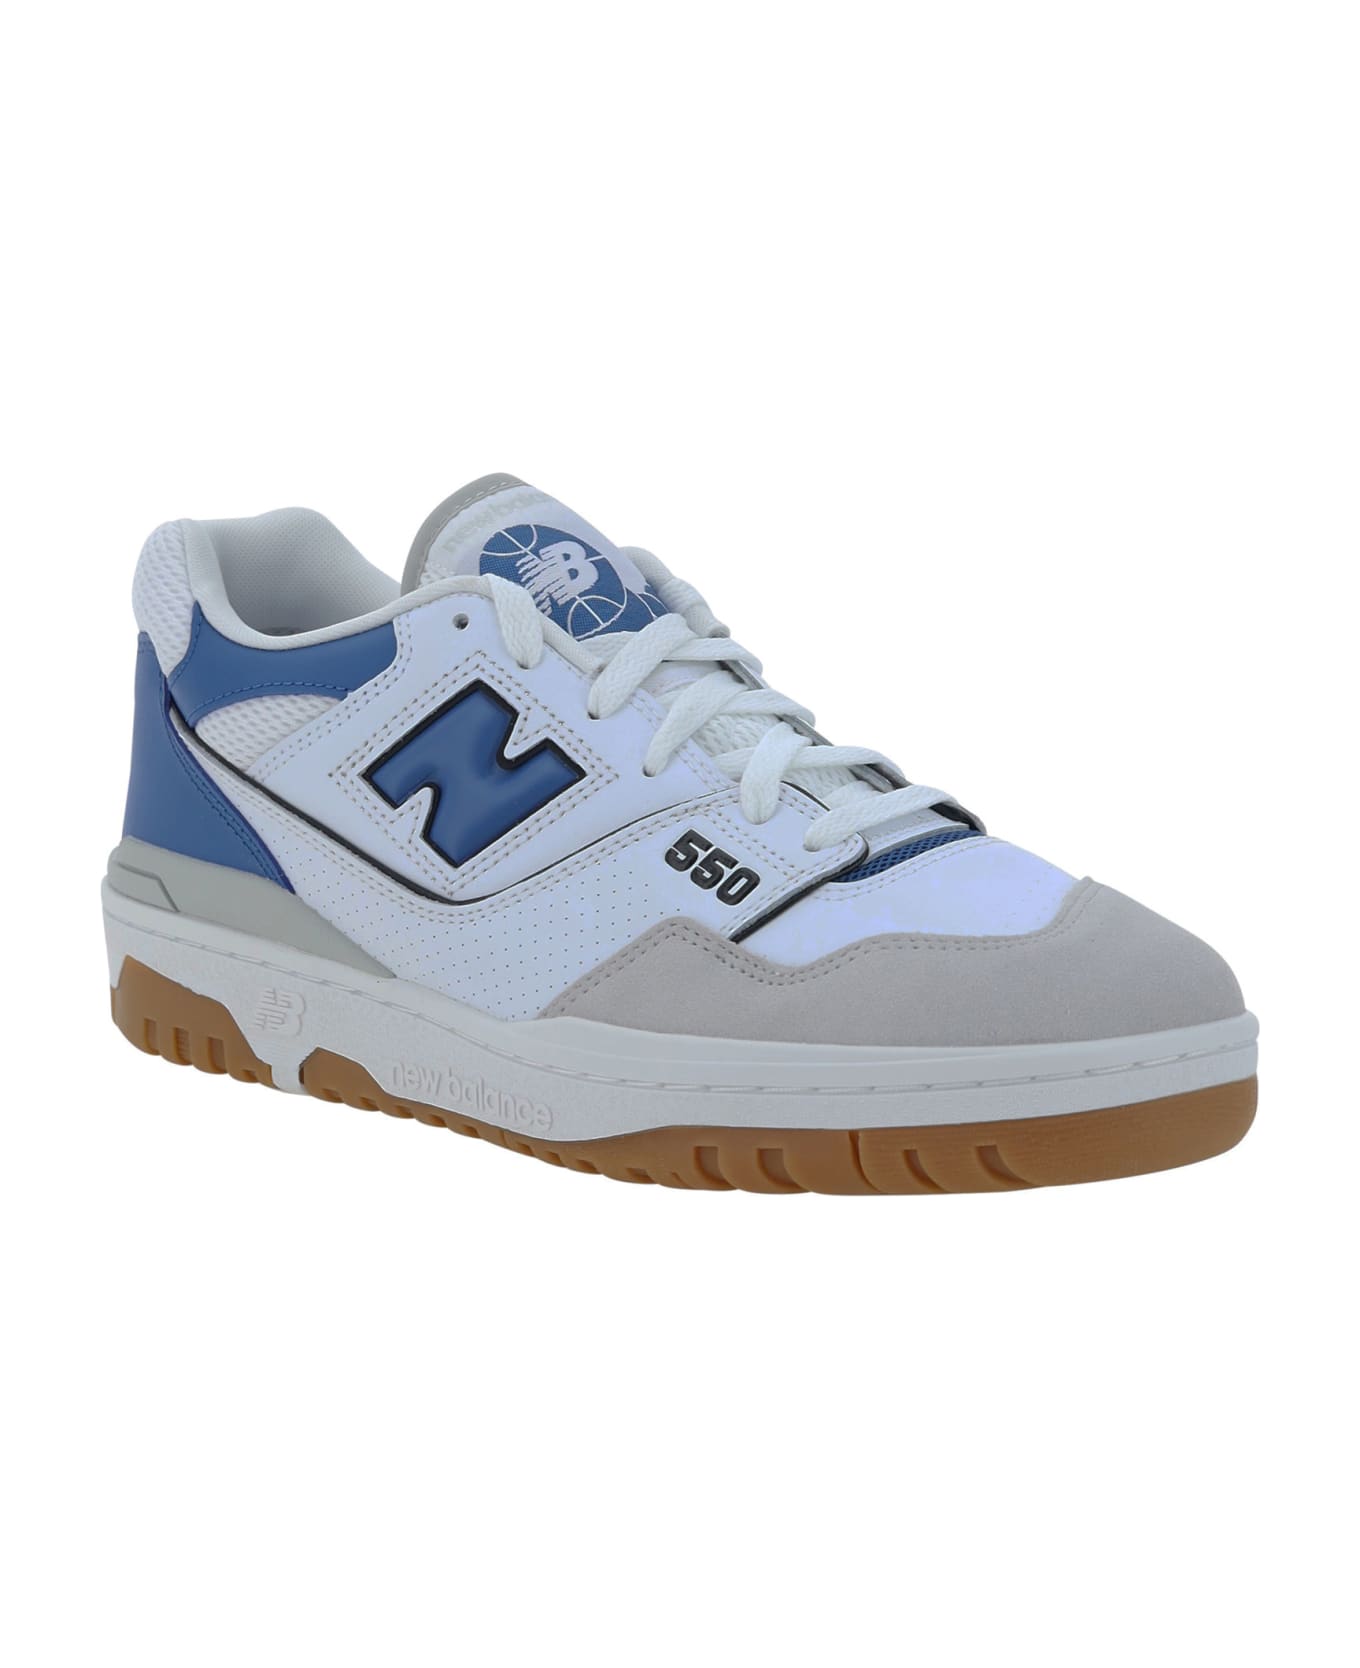 New Balance 550 Sneakers - White/blue